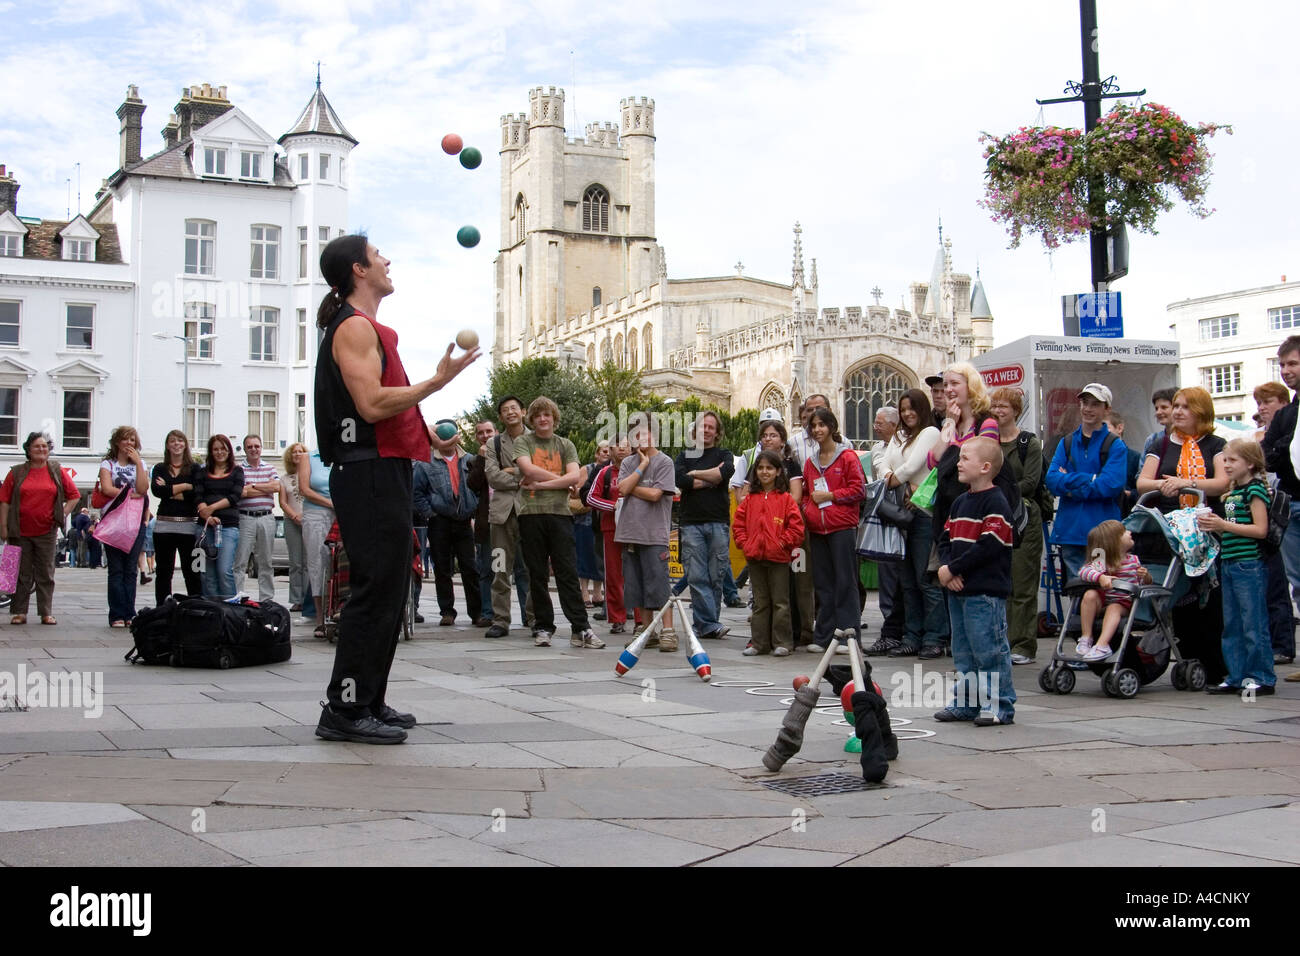 Juggling street performer pulls a crowd in Cambridge market square, England Stock Photo